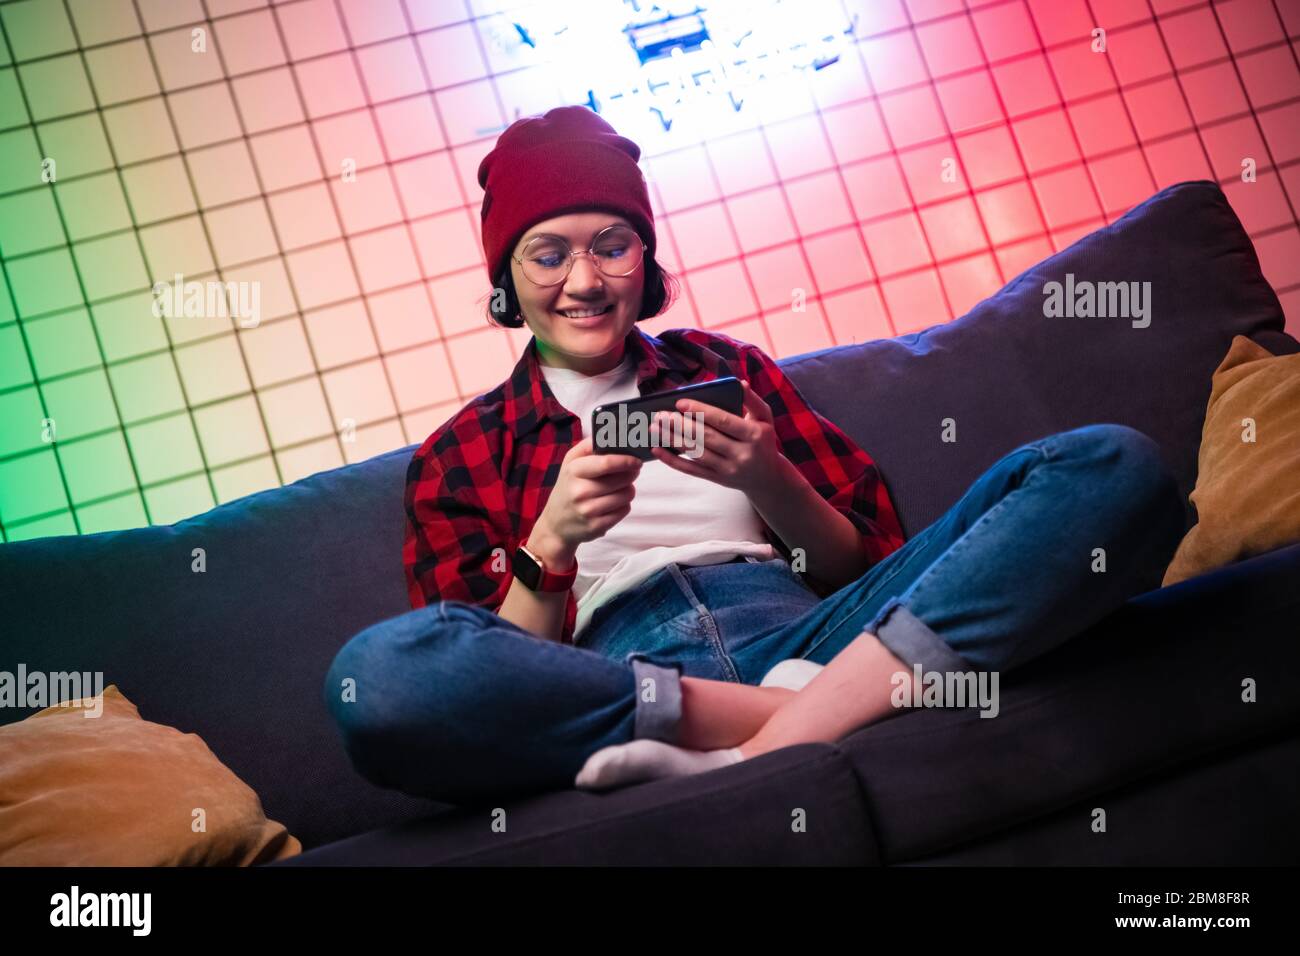 Teenager girl holding a smartphone while playing online shooting gaming. Thumbs up gesture. Stock Photo